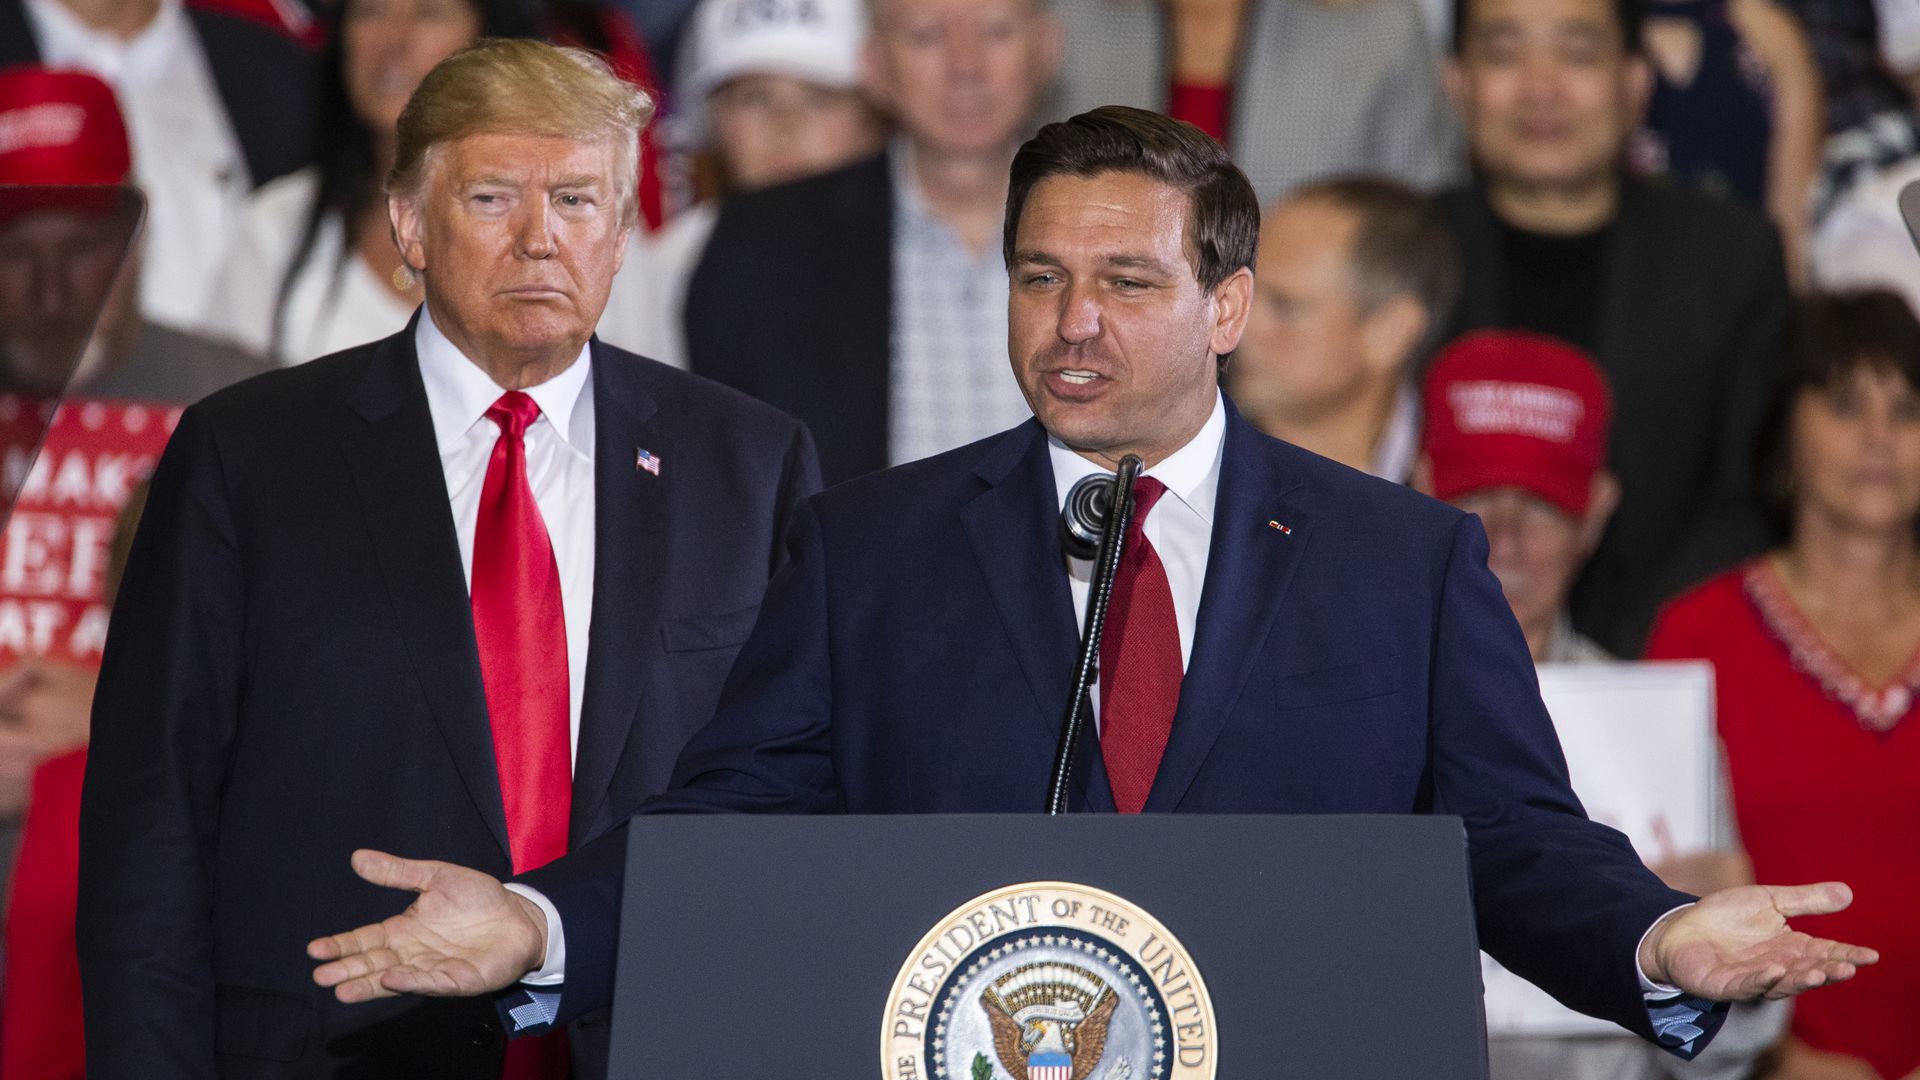 Florida Republican gubernatorial candidate Ron DeSantis speaks with U.S. President Donald Trump at a campaign rally at the Pensacola International Airport on November 3, 2018 in Pensacola, Florida